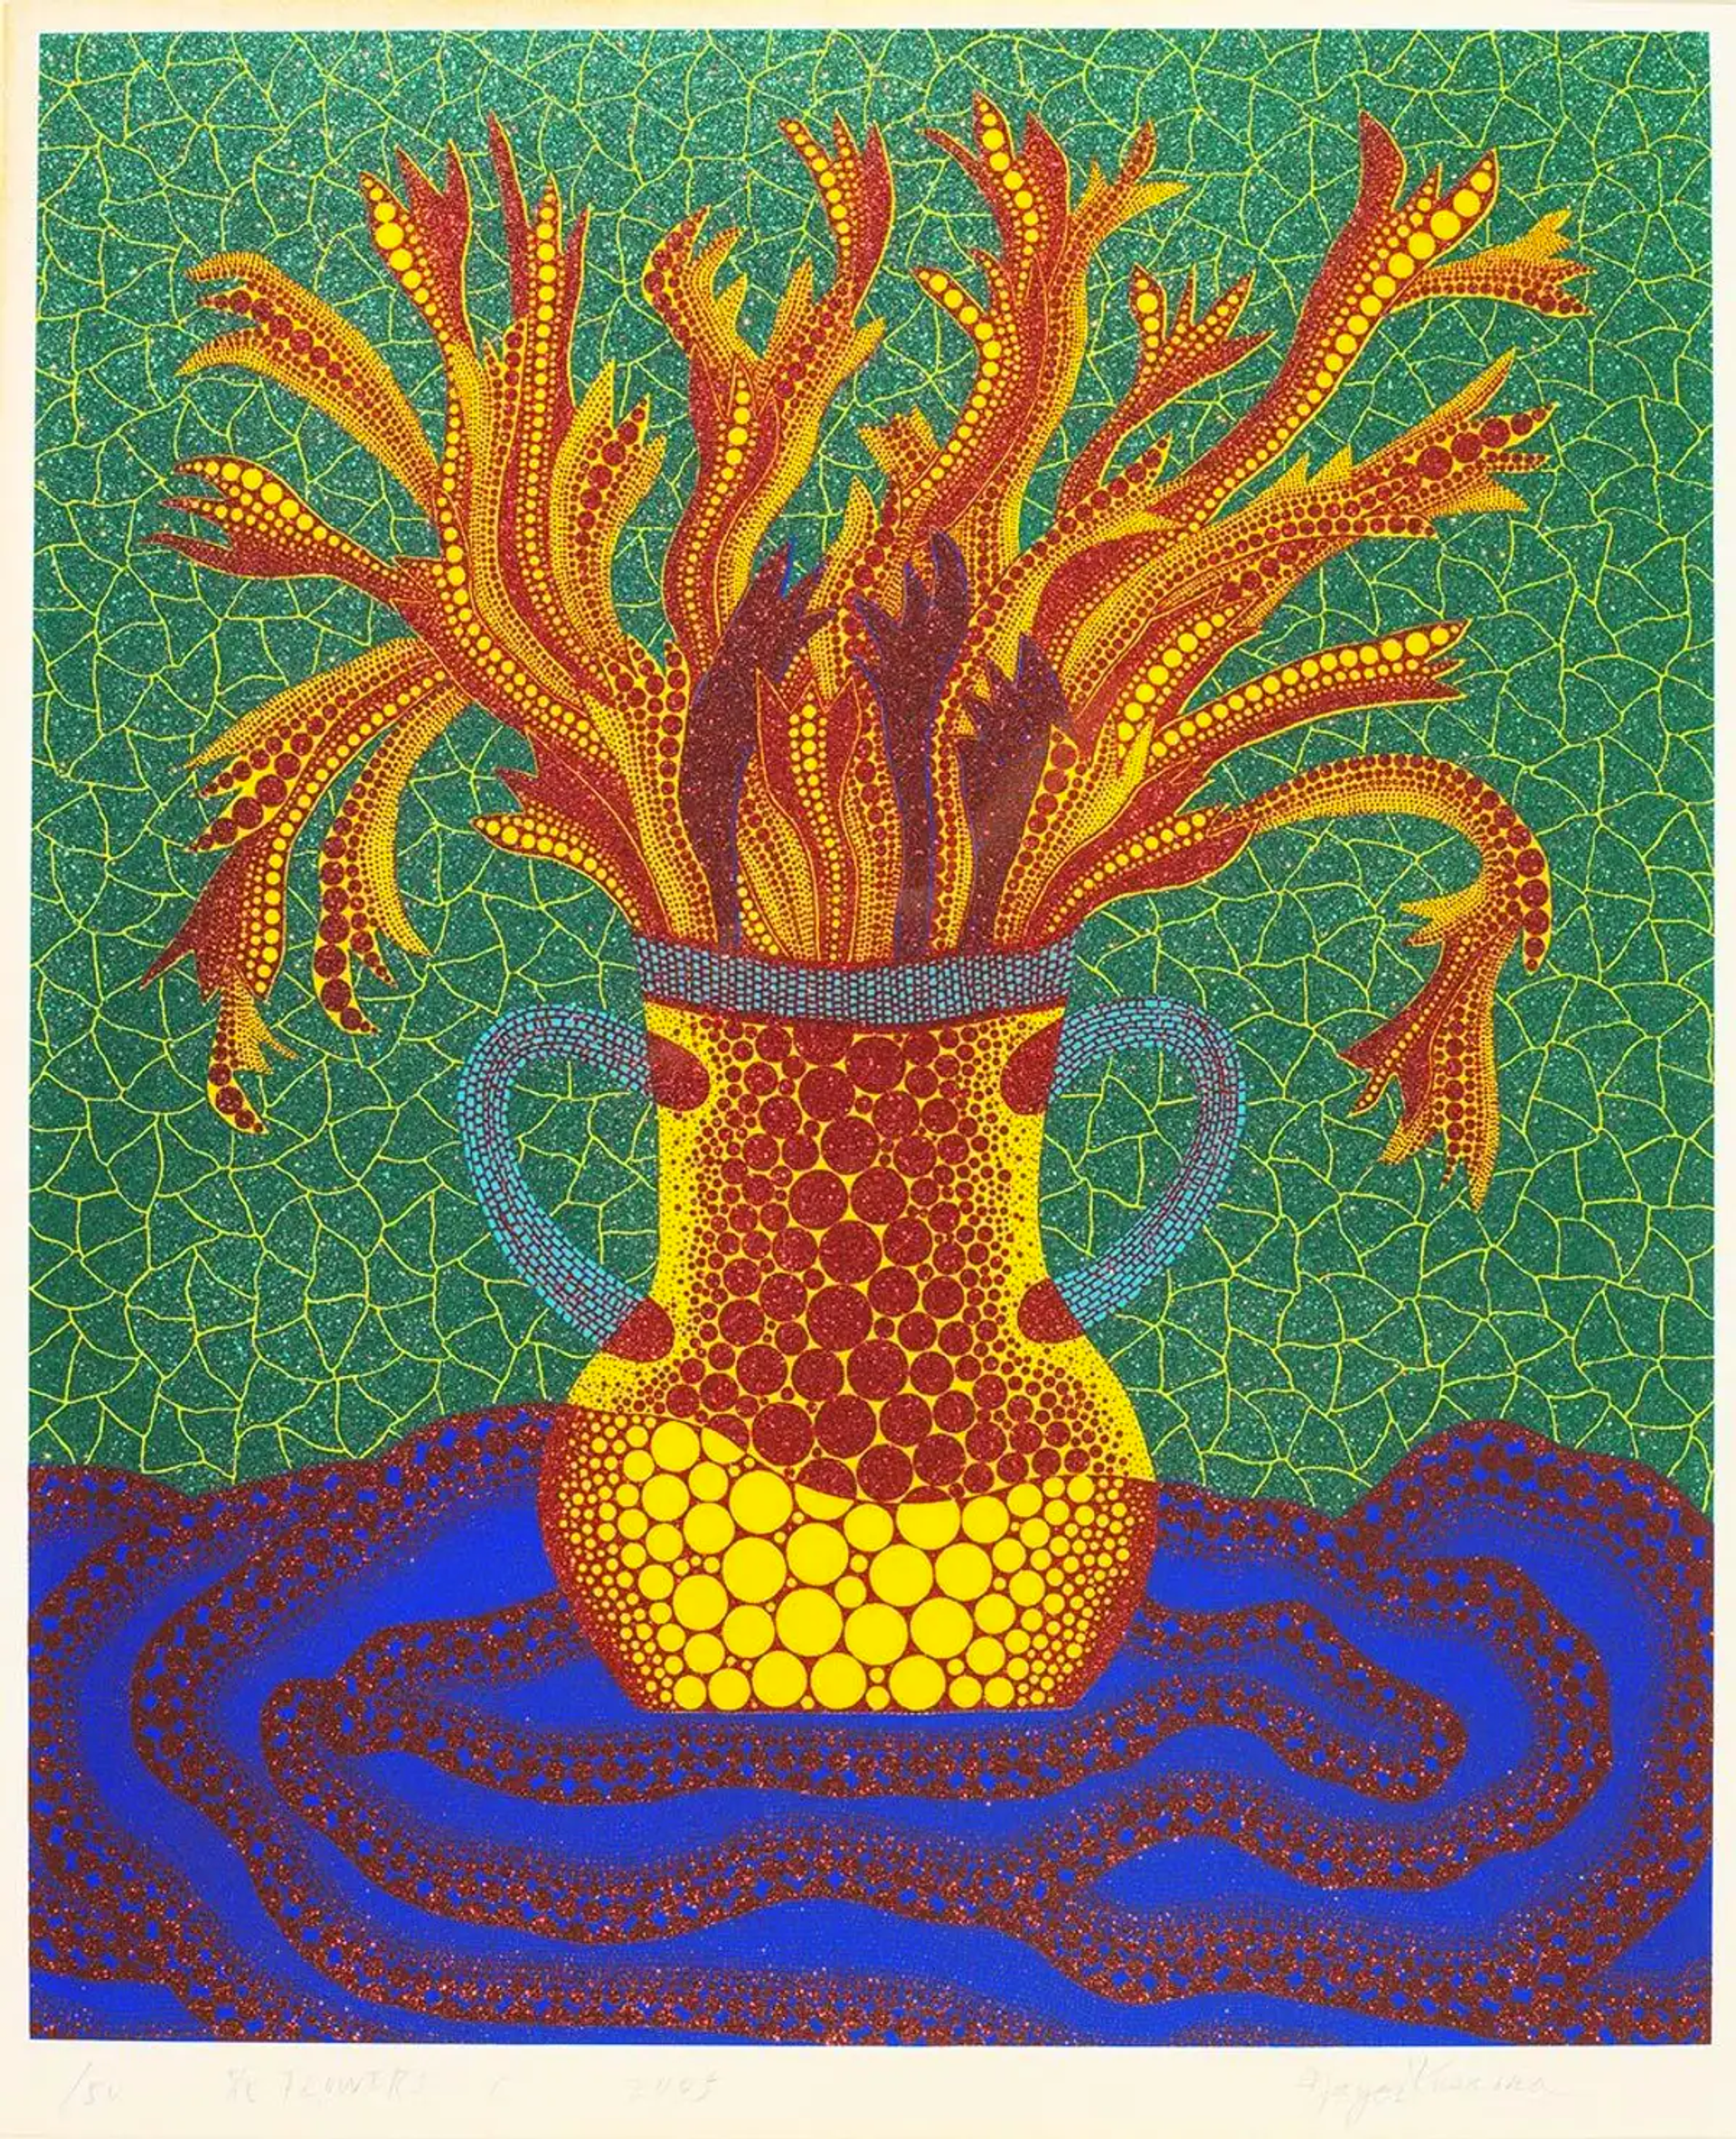 Yayoi Kusama’s Flowers C. A screenprint of a yellow and red polka dot vase holding flowers made of red and yellow polka dots against a green and yellow geometric background. The vase is seated on a blue and red pattern. 